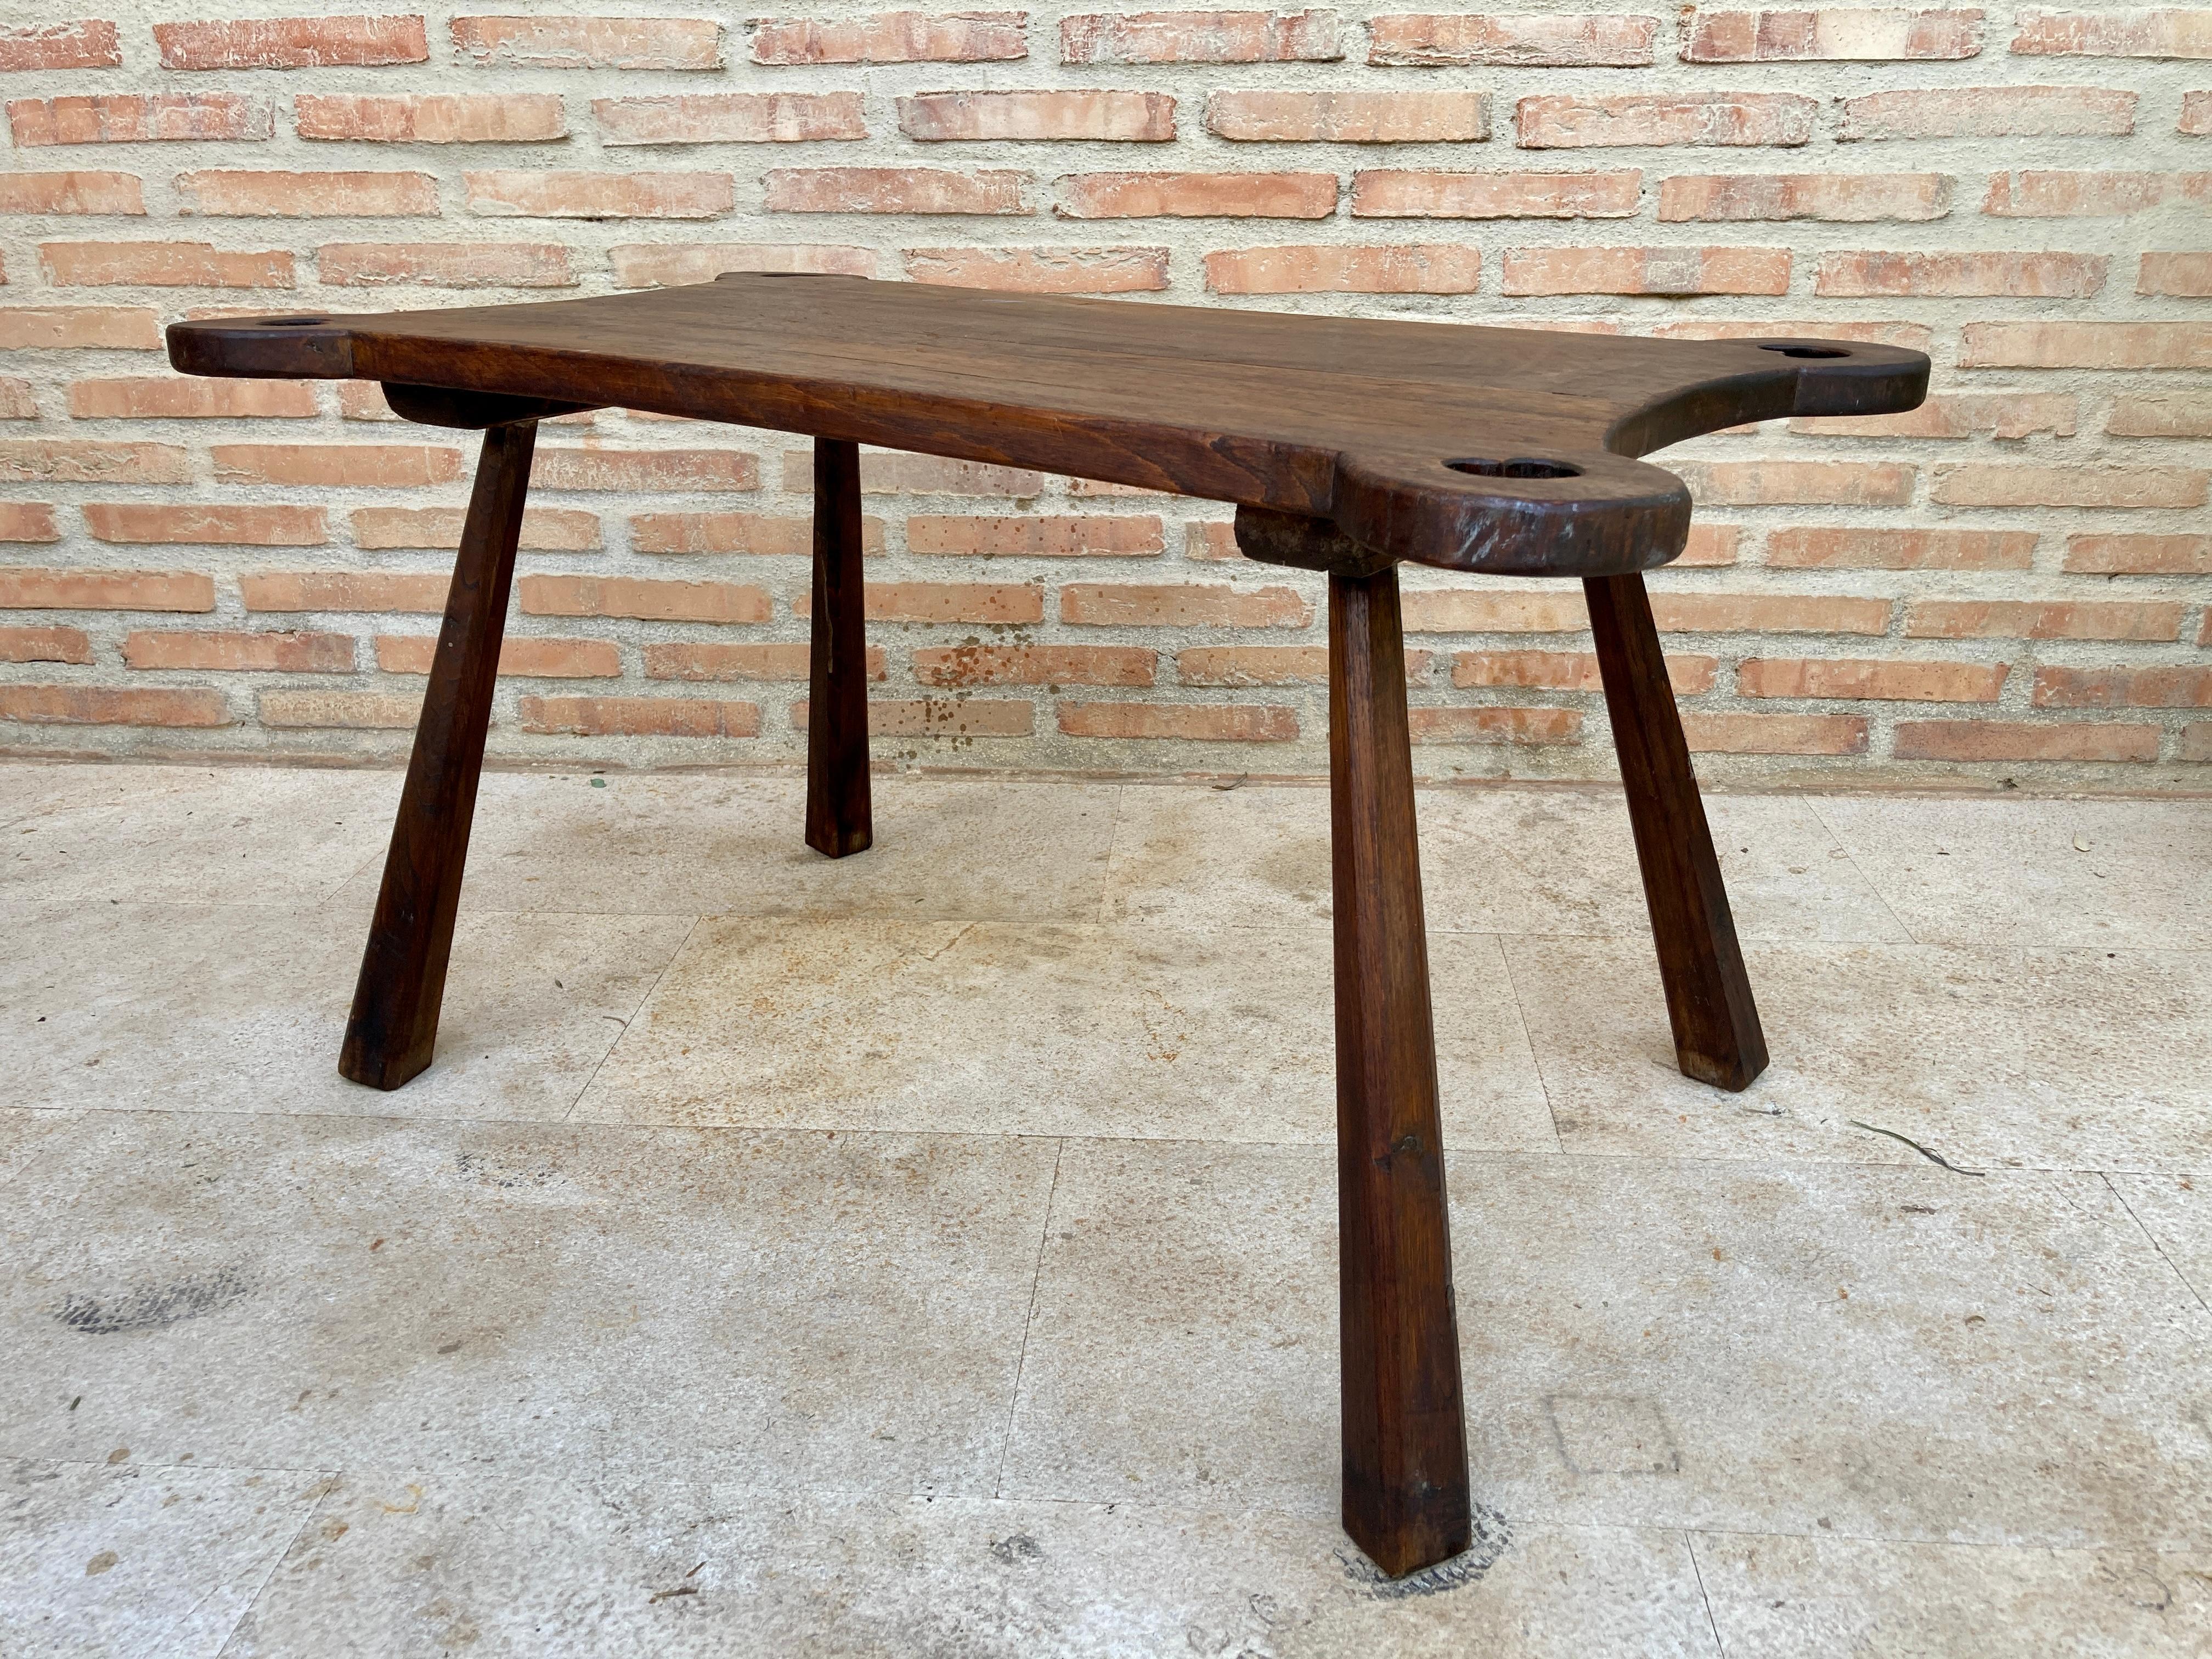 French mid-20th century side table. This rustic French side table features a thick, rectangular-shaped top with decorative holes in the four corners of the tabletop, which stands on four twig legs. The table is made of walnut wood, which has a nice